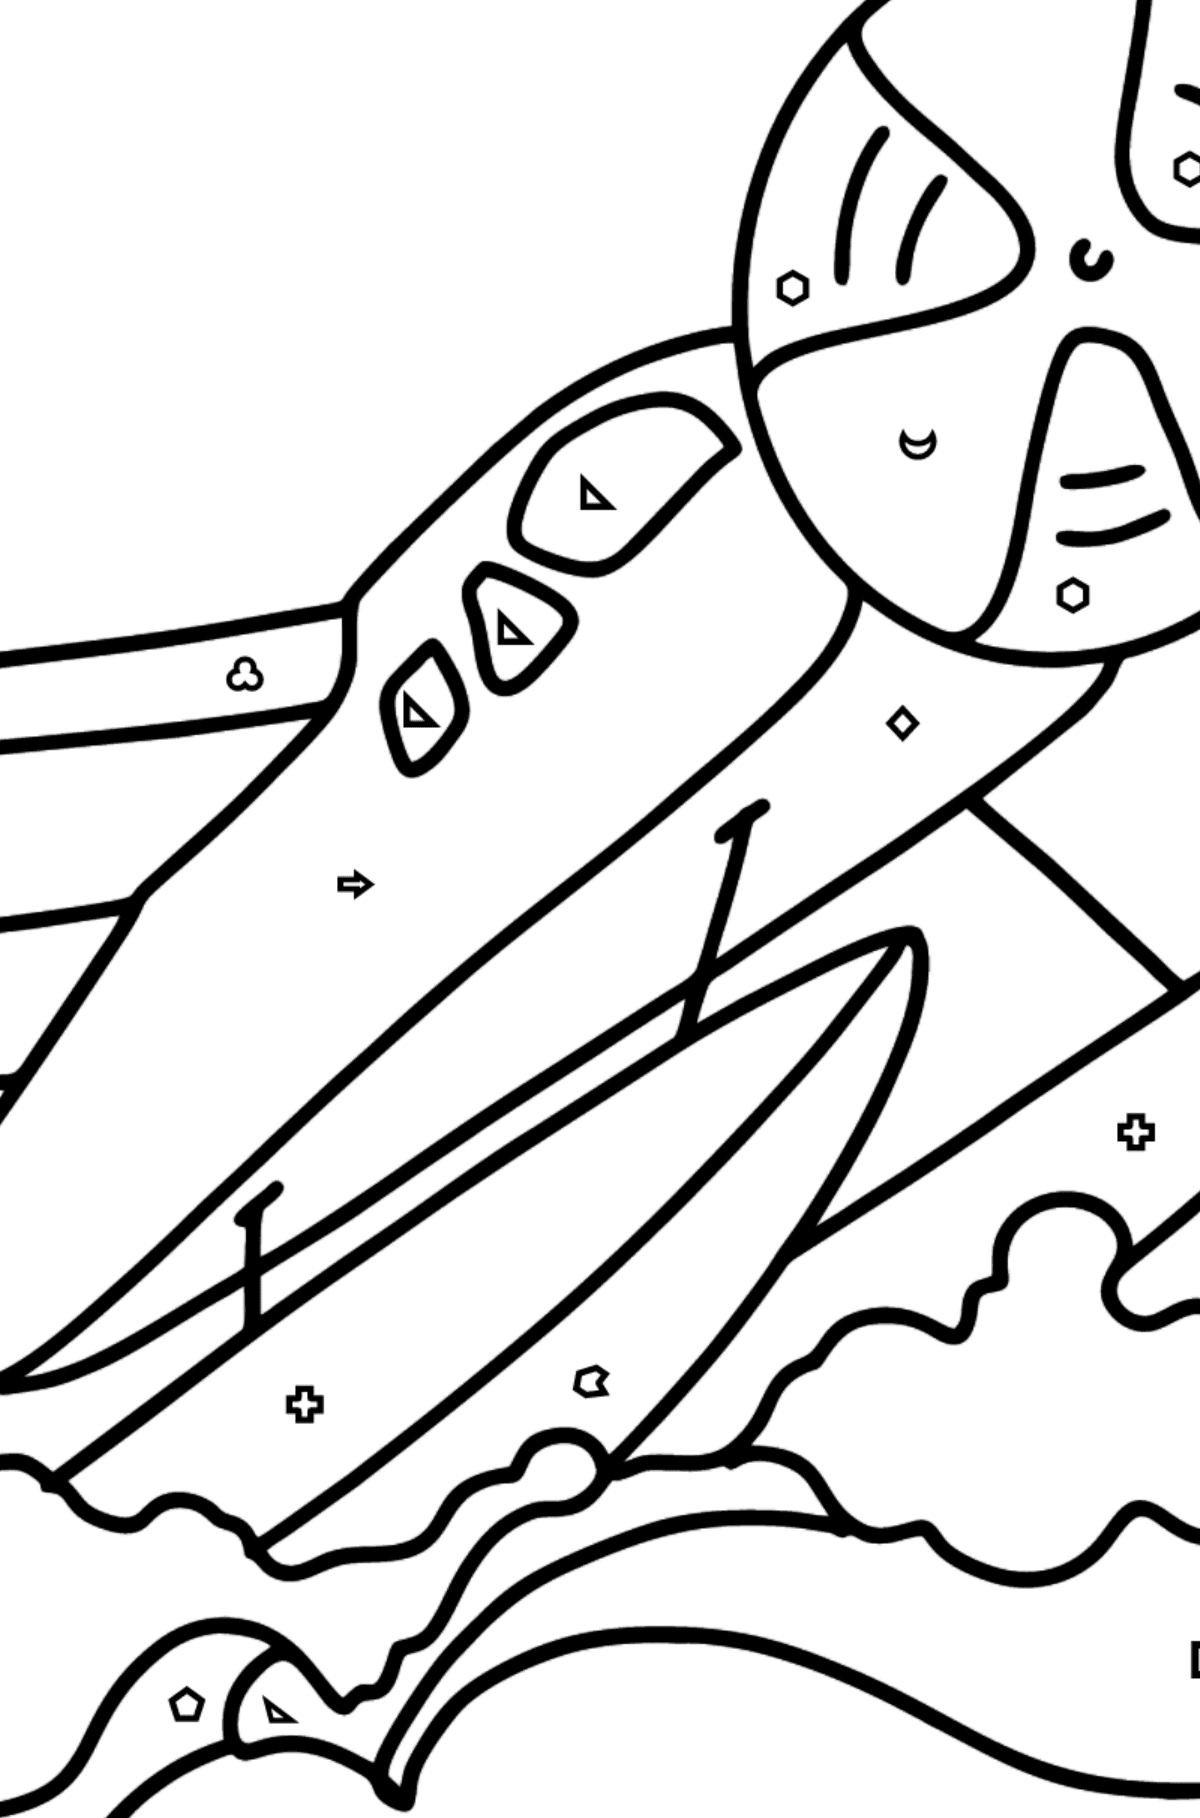 Amphibious Airplane coloring page - Coloring by Geometric Shapes for Kids